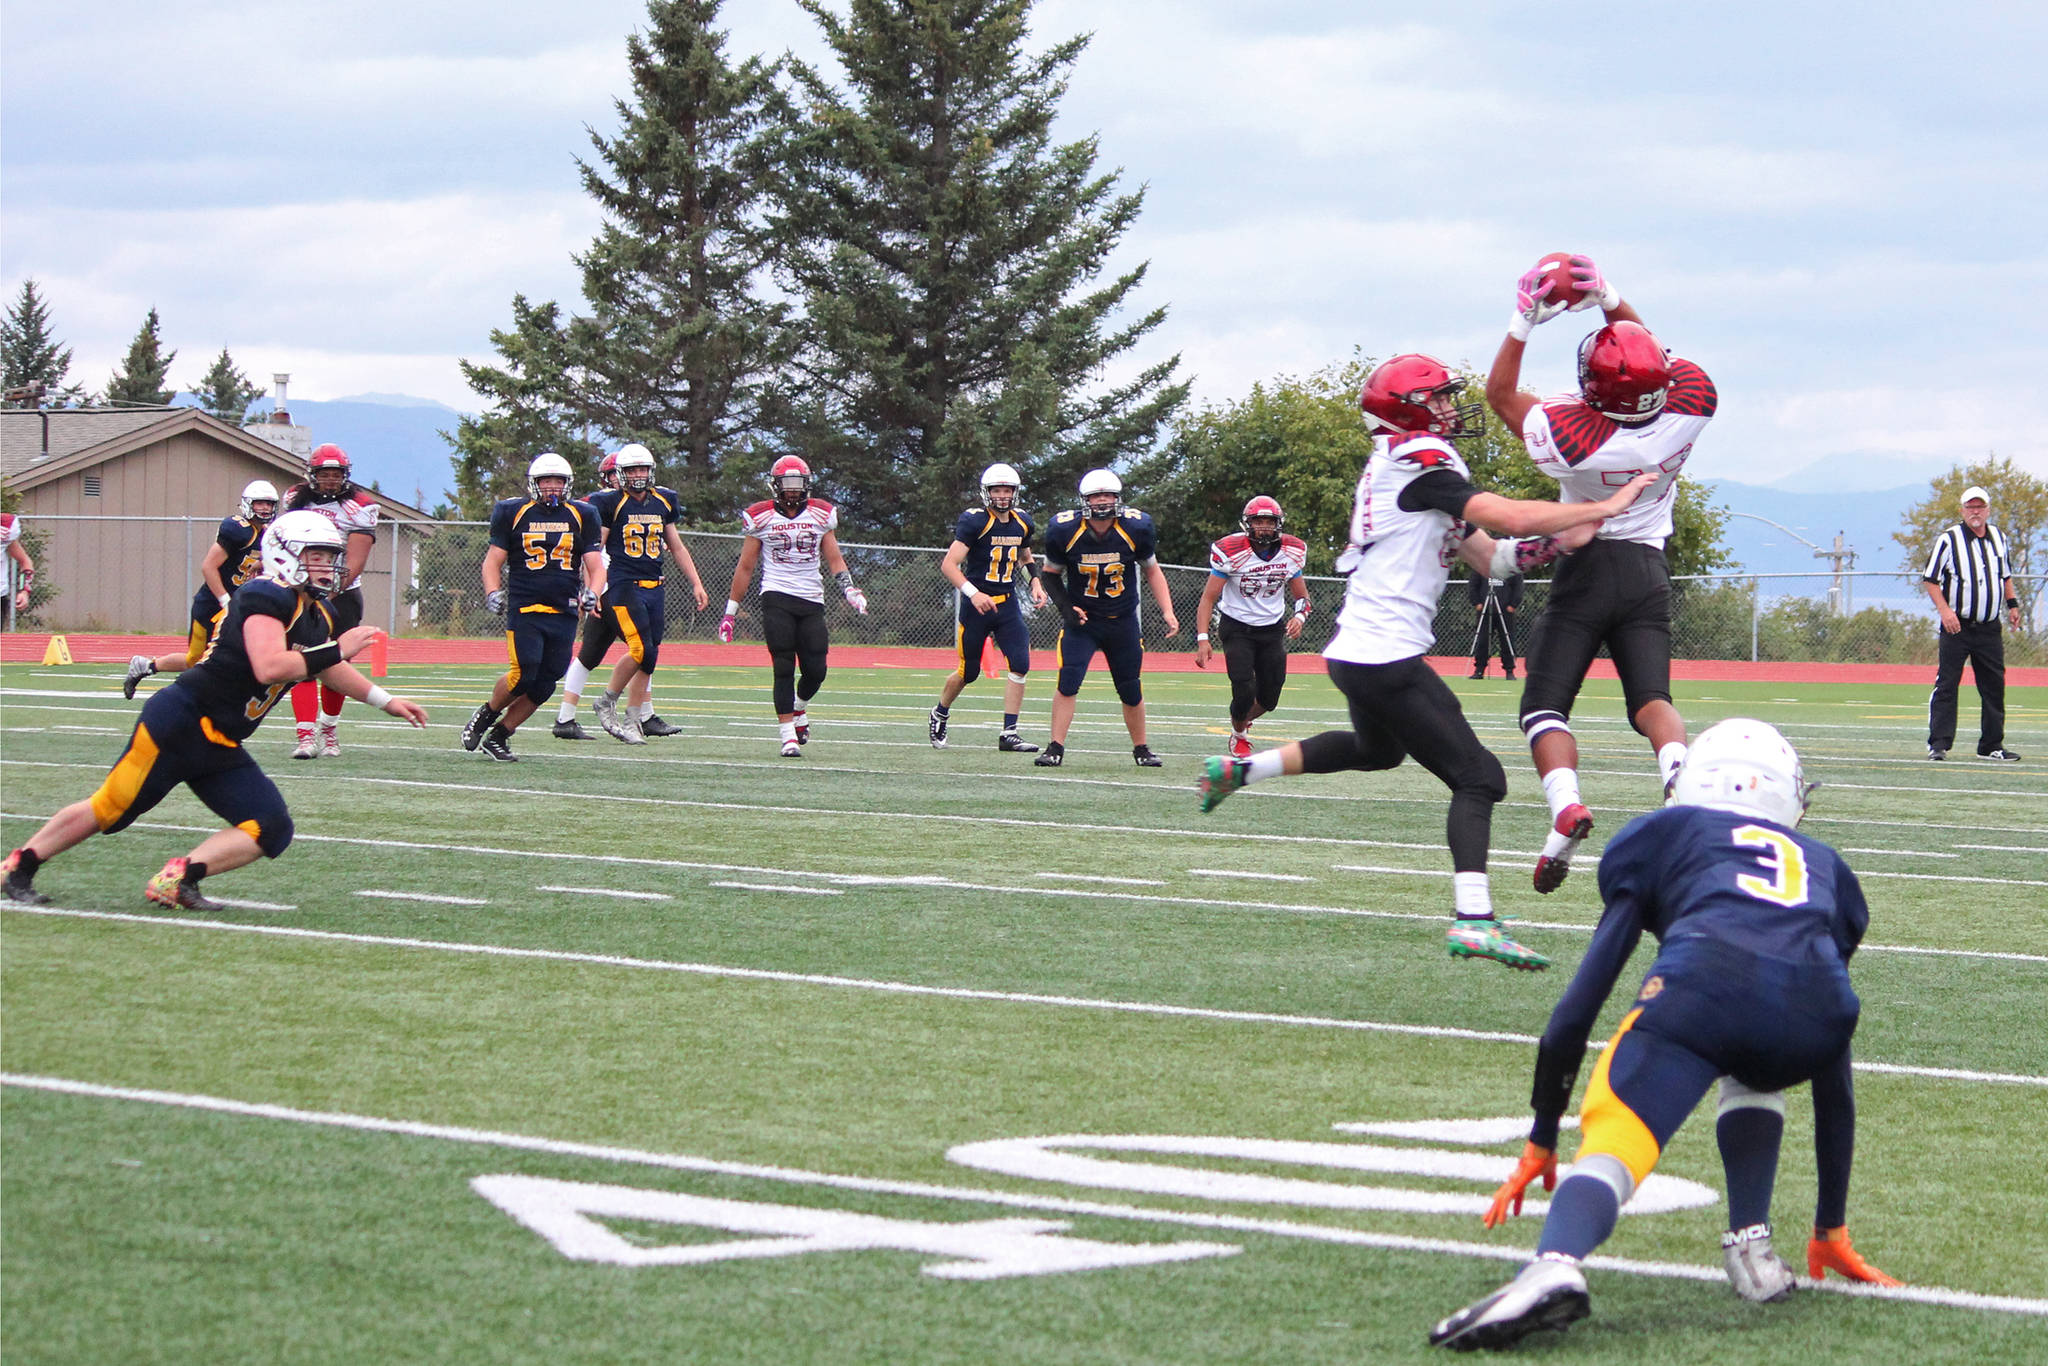 Houston’s Apete Sasiu intercepts a pass from Homer’s Josh Bradshaw before marking a touchdown during a Friday, Sept. 6, 2019 football game between the two teams at Homer High School in Homer, Alaska. (Photo by Megan Pacer/Homer News)